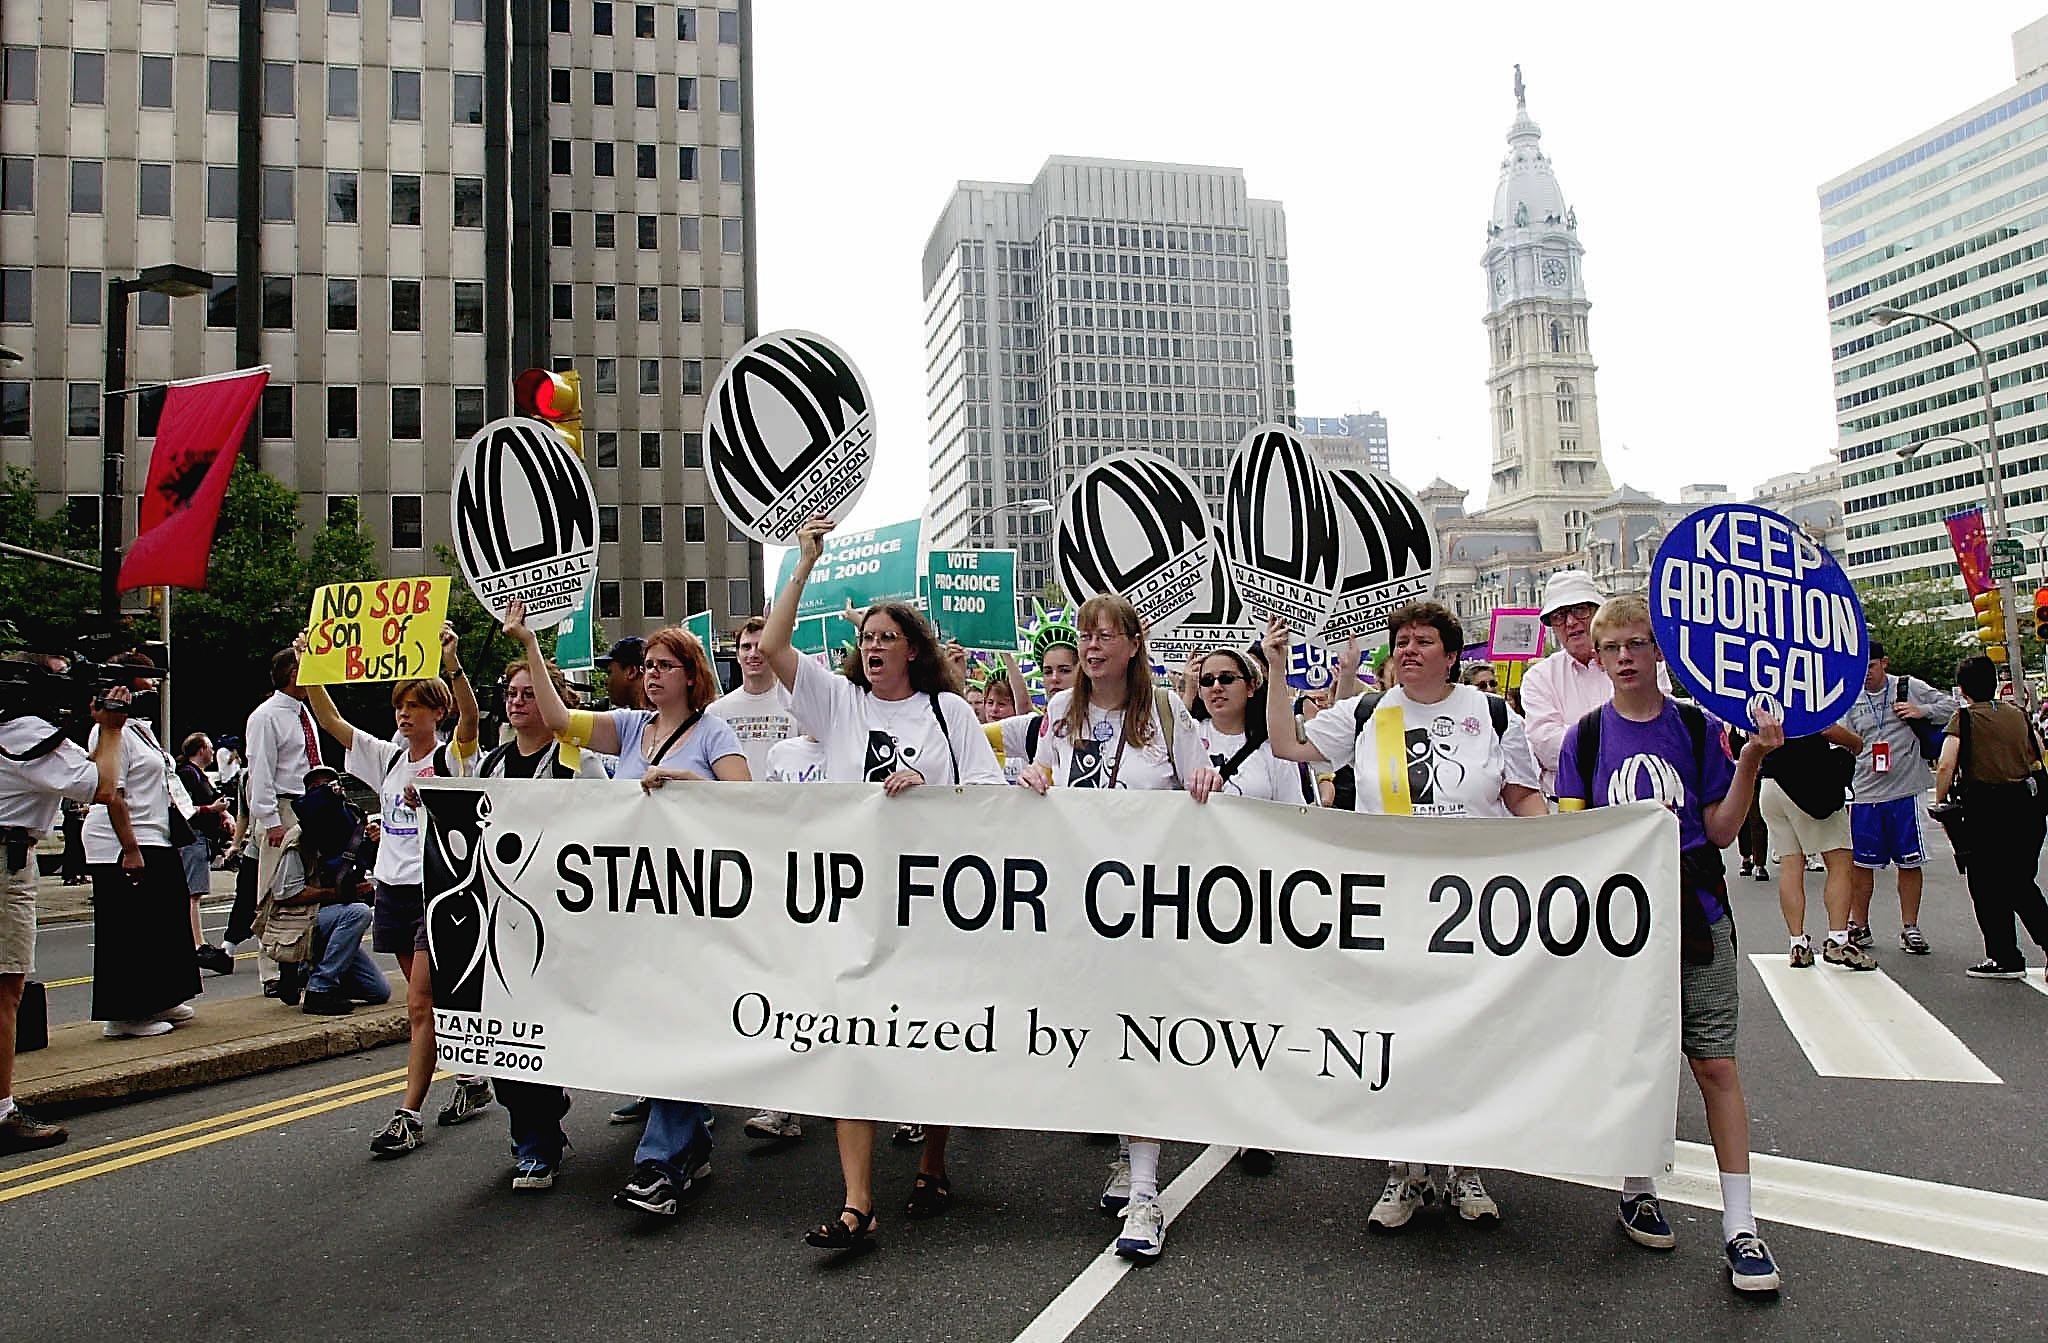 People march in the street holding a banner &quot;stand up for choice 2000&quot;